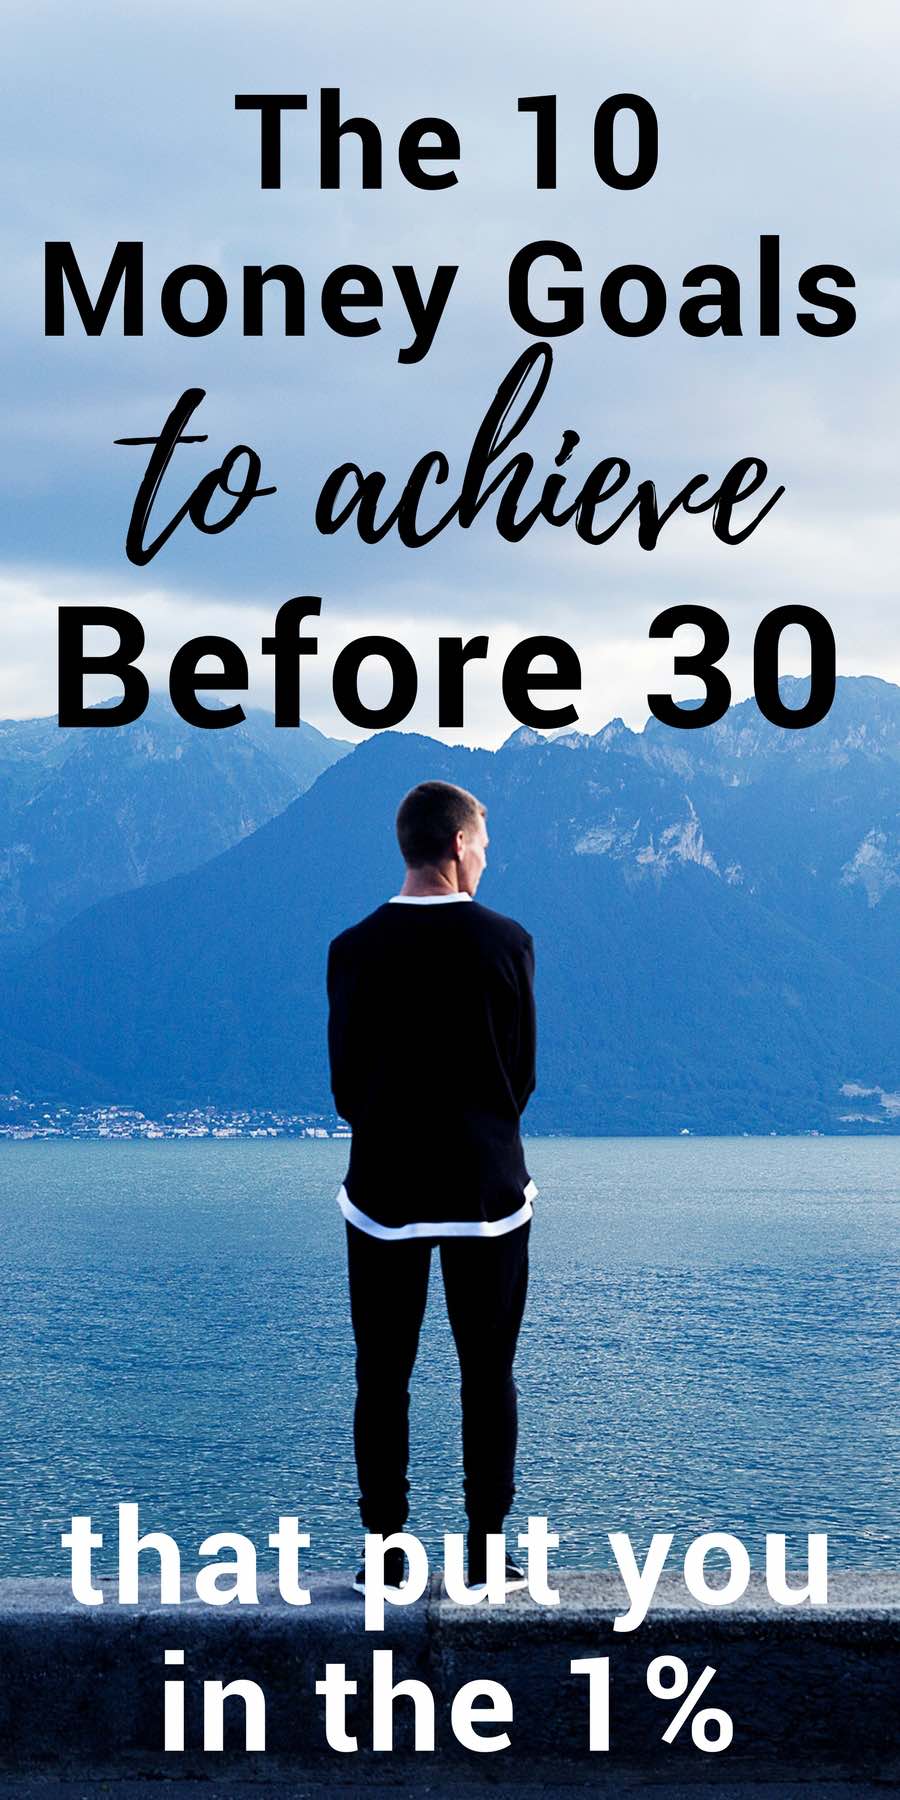 Money tips for twenty somethings | money bucket list for age 30 | what to achieve by age 30